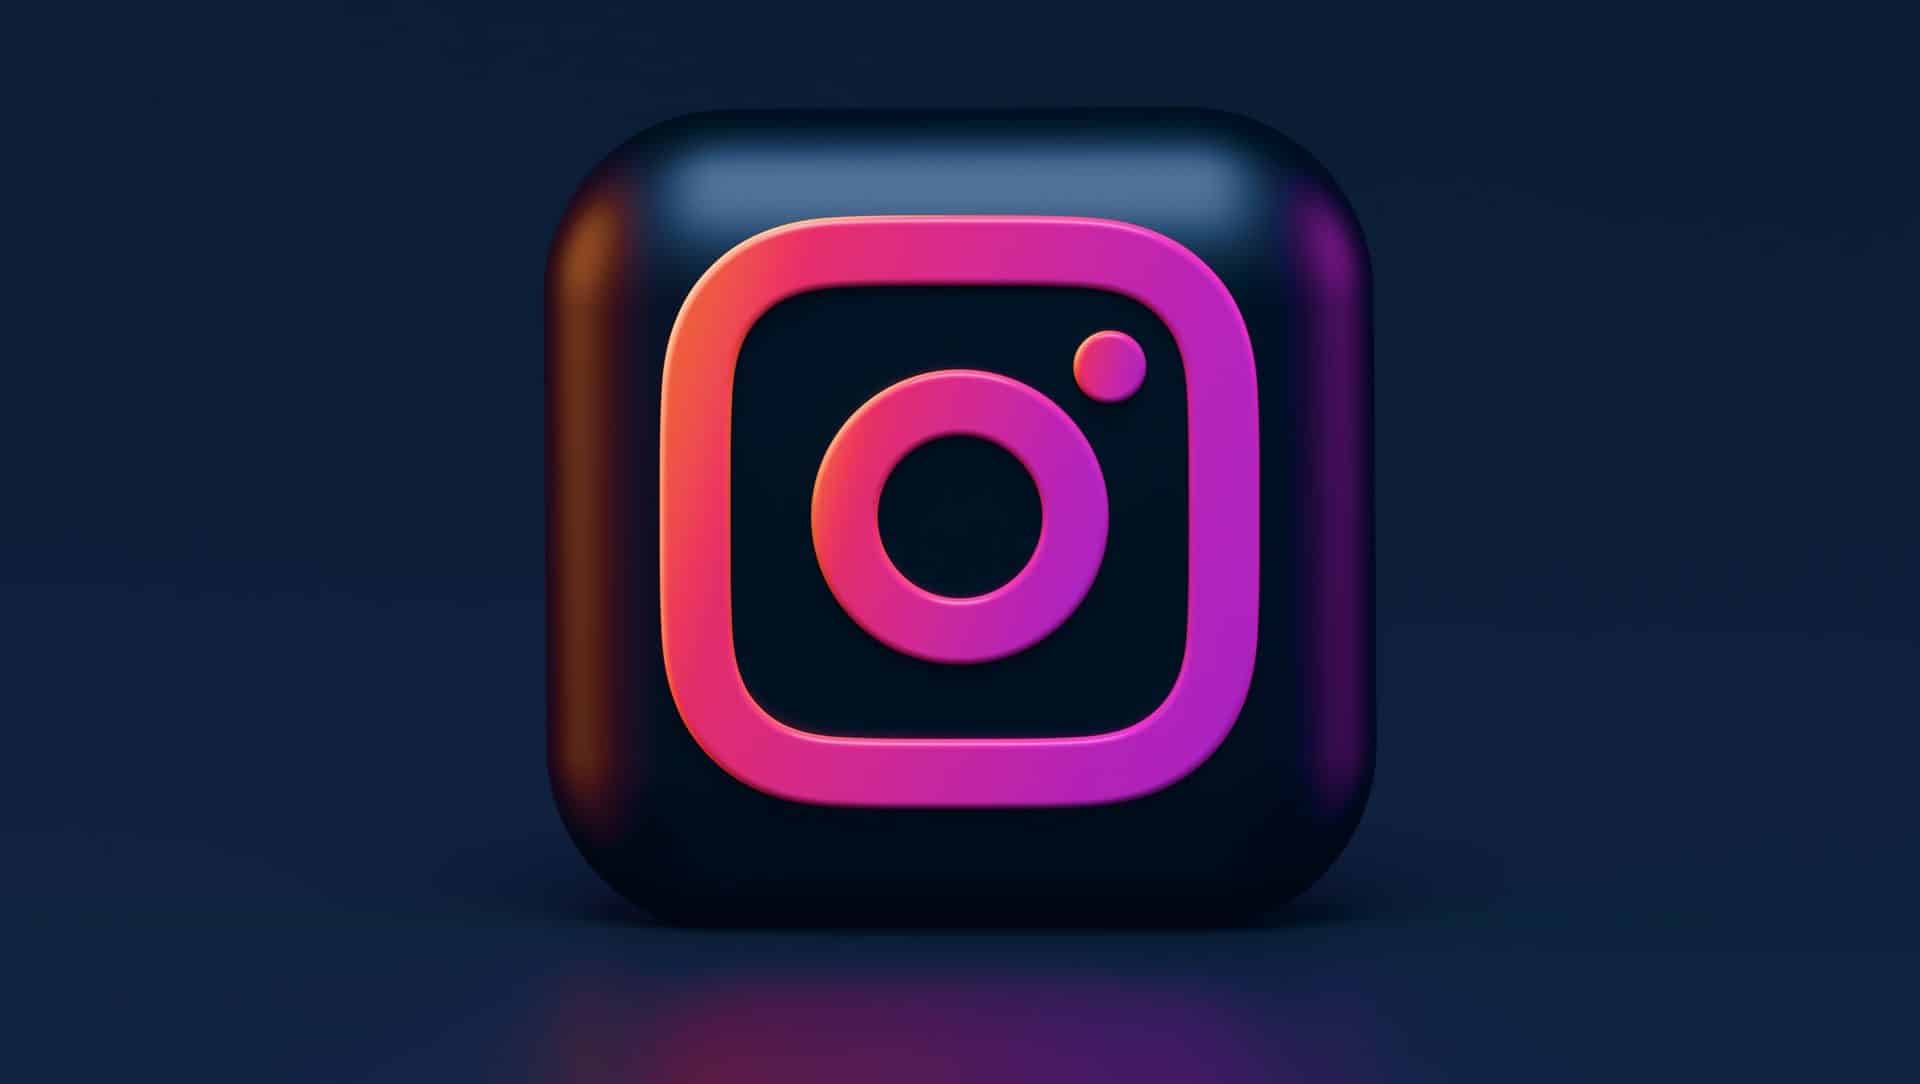 The Instagram logo in front of a dark background - how can entrepreneurs take advantage of Instagram promotion?